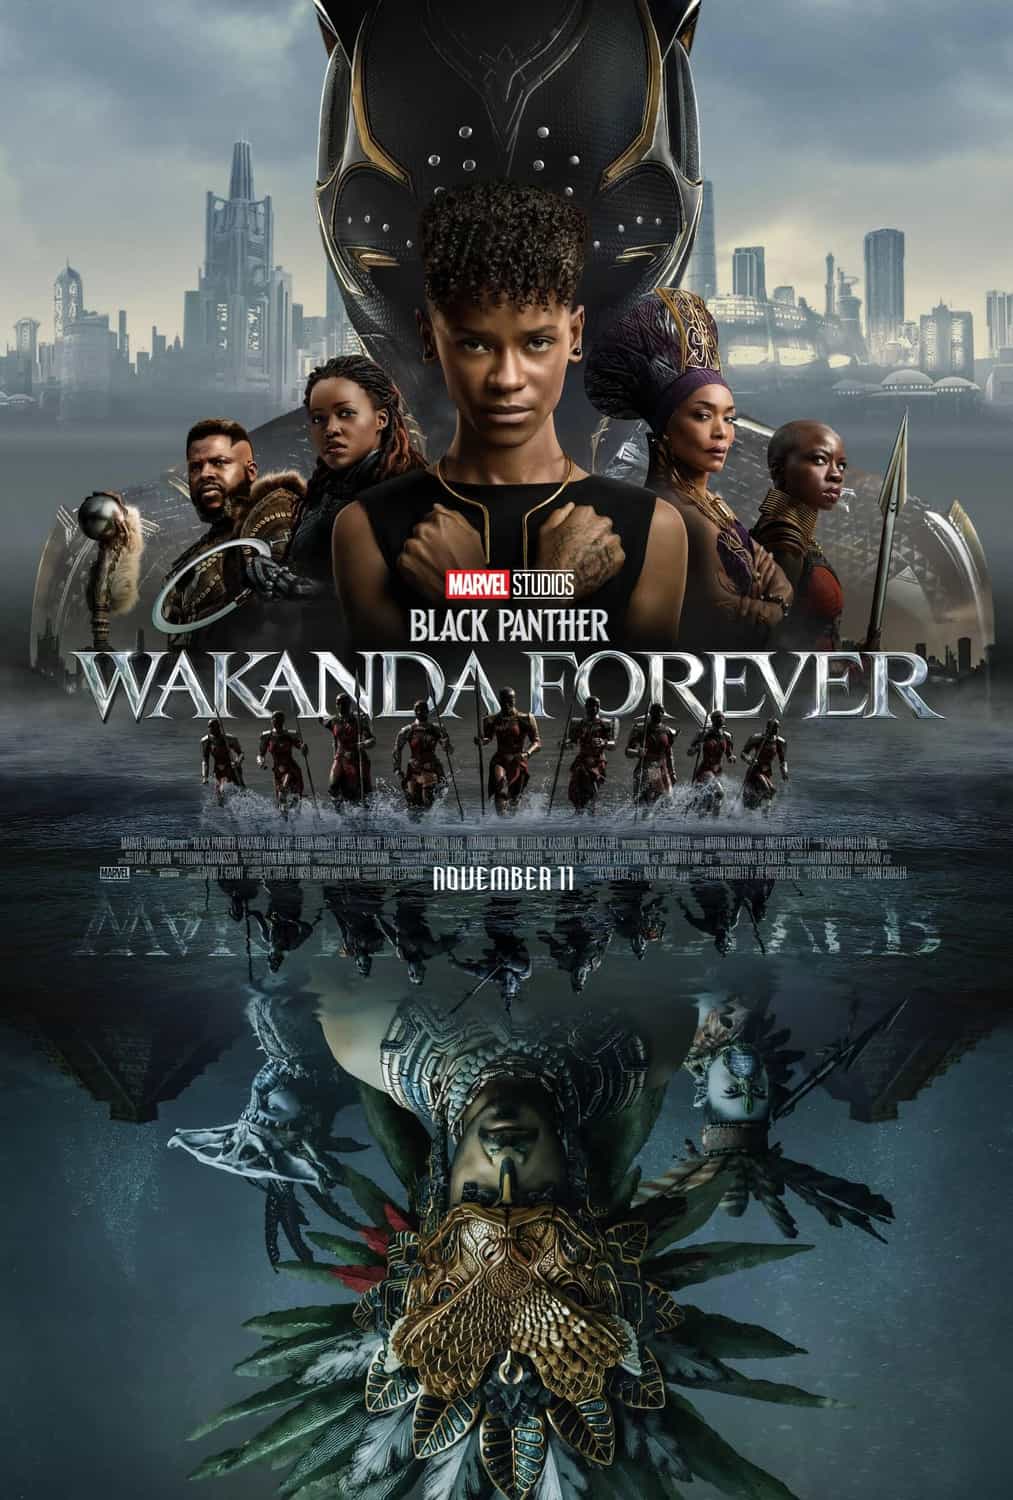 First trailer and poster released for Black Panther: Wakanda Forever starring Martin Freeman - movie UK release date 11th November 2022 #blackpantherwakandaforever